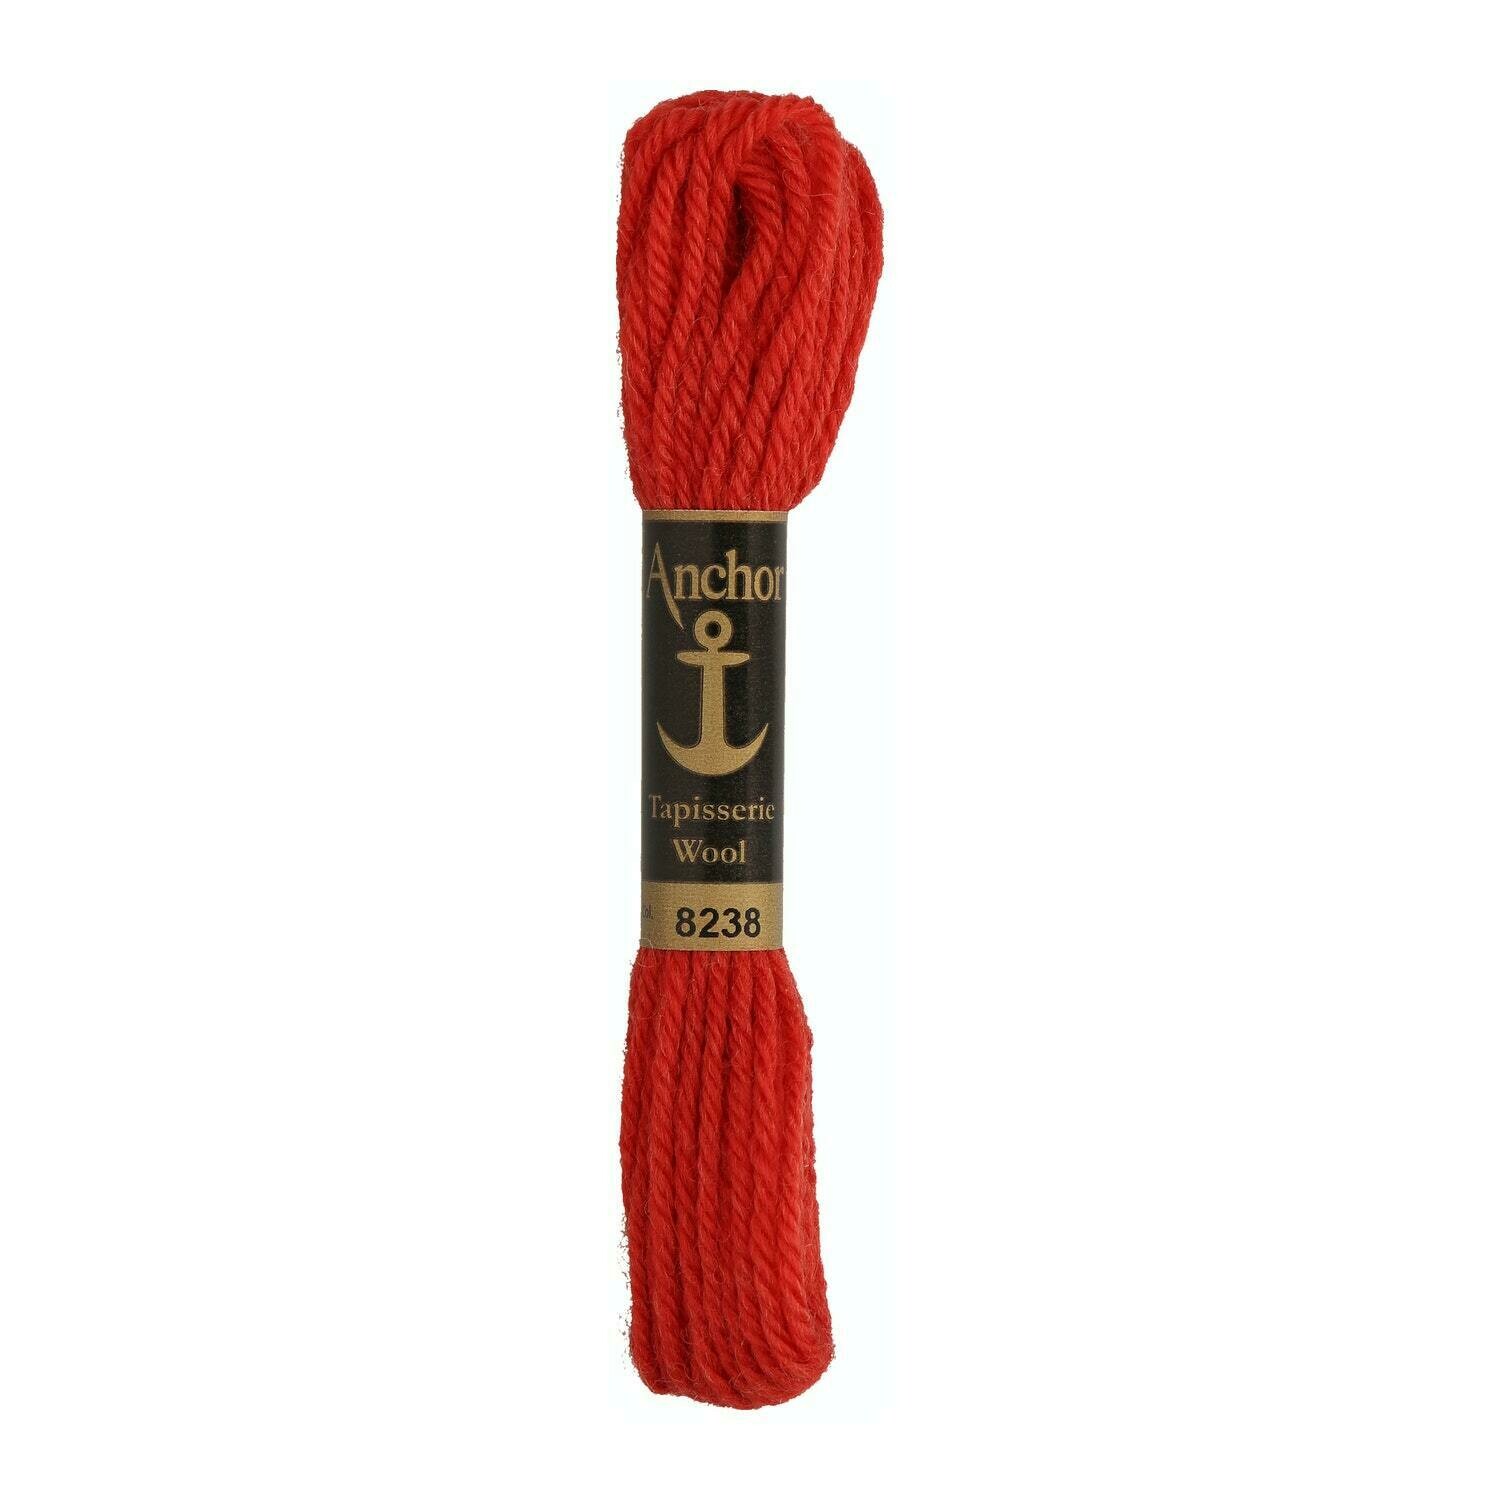 Anchor Tapisserie Wool #08238